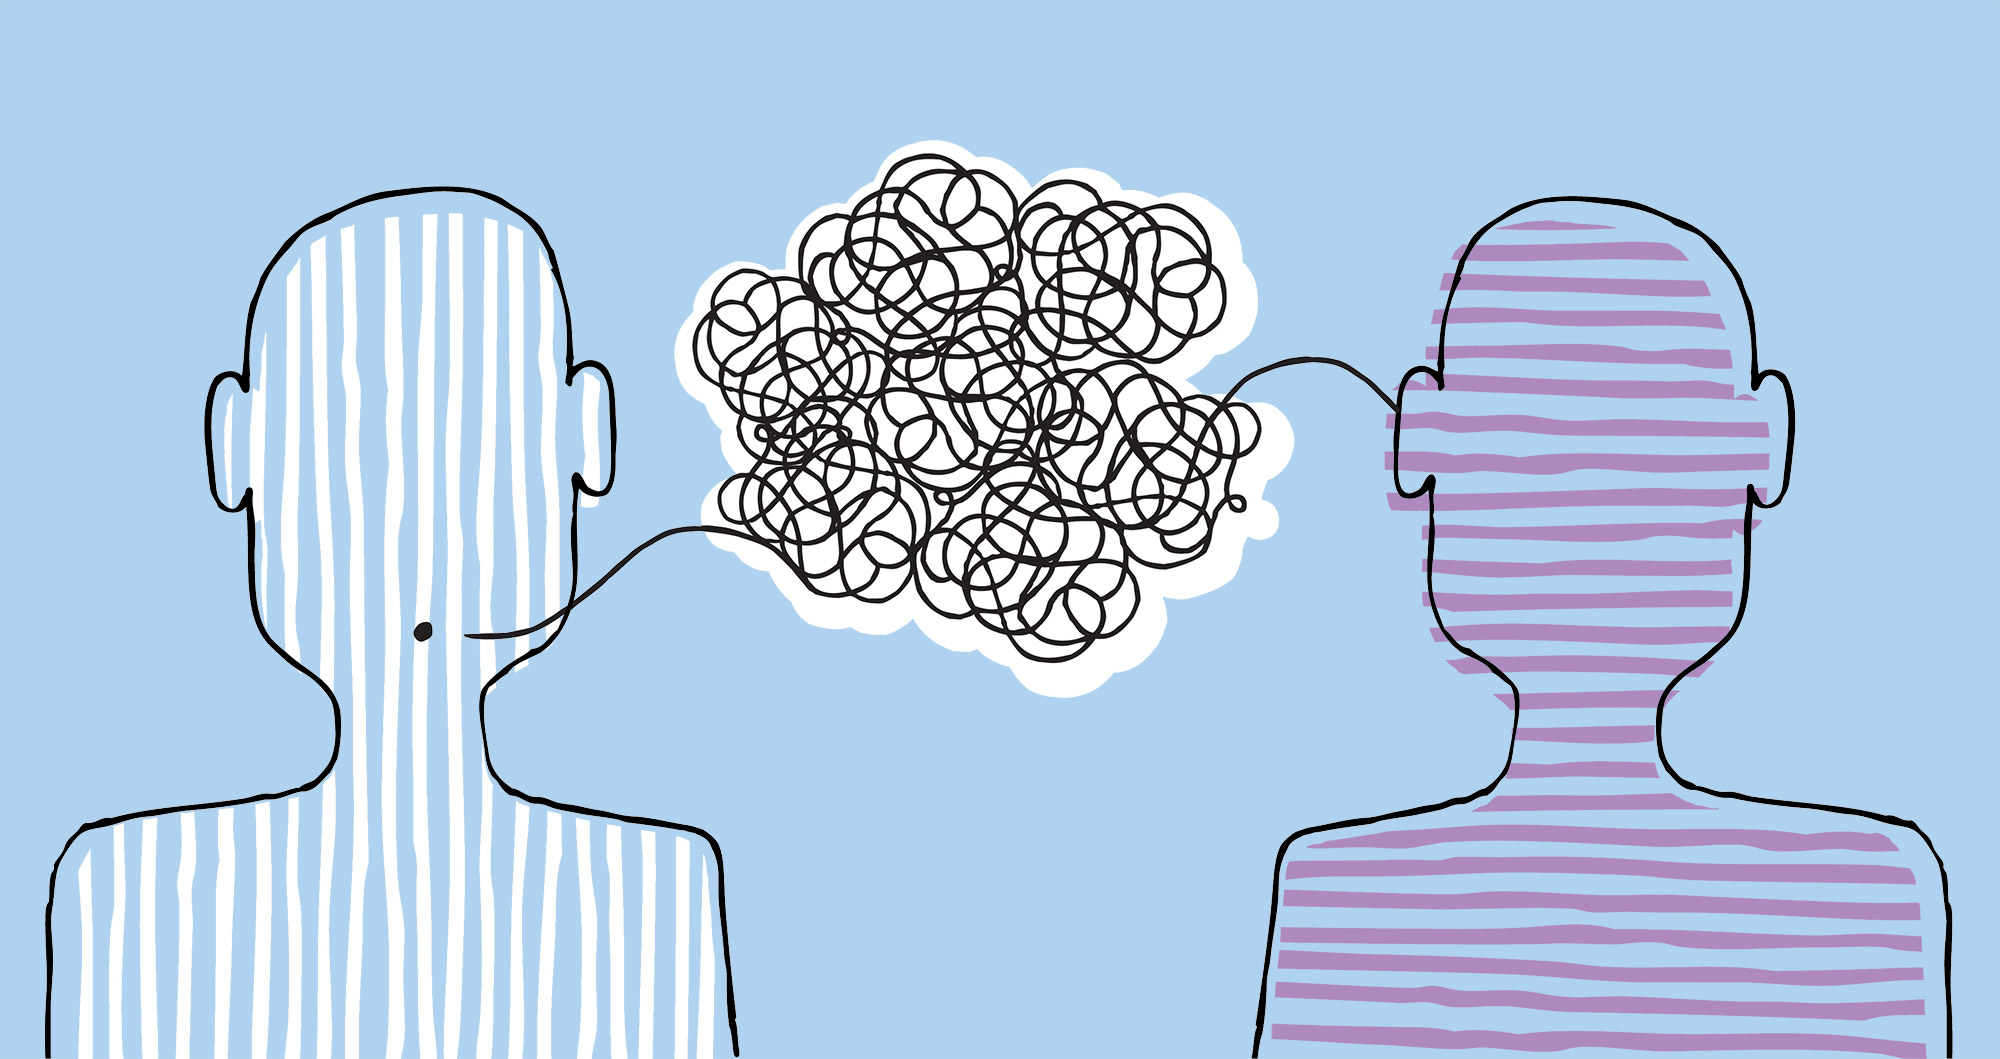 illustration of two people, one speaking and one listening with a scrambled tangled tether